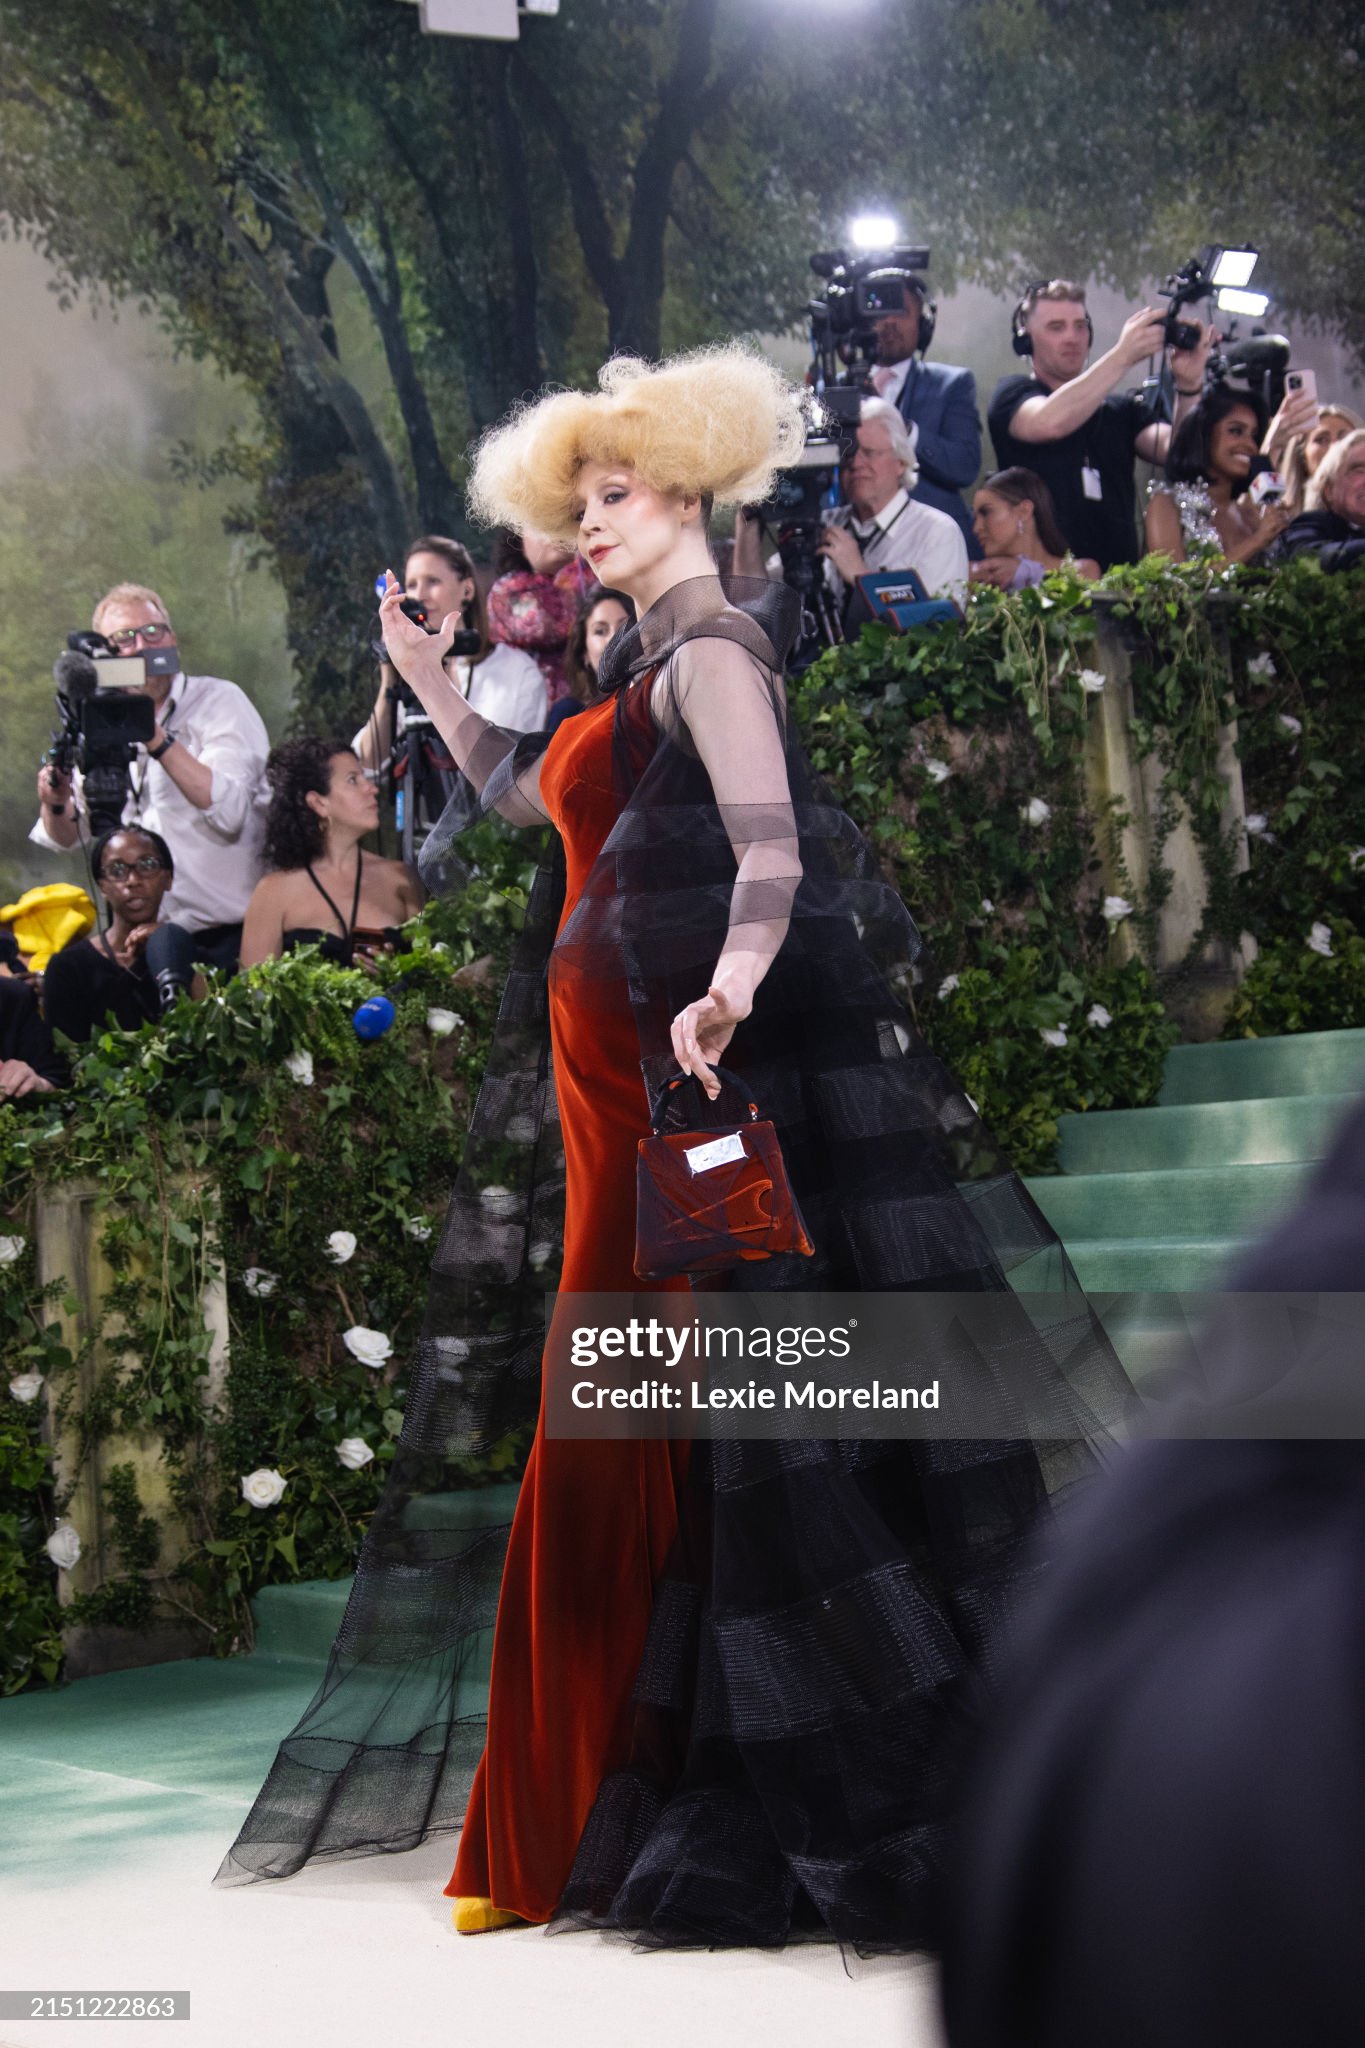 gettyimages-2151222863-2048x2048.jpg